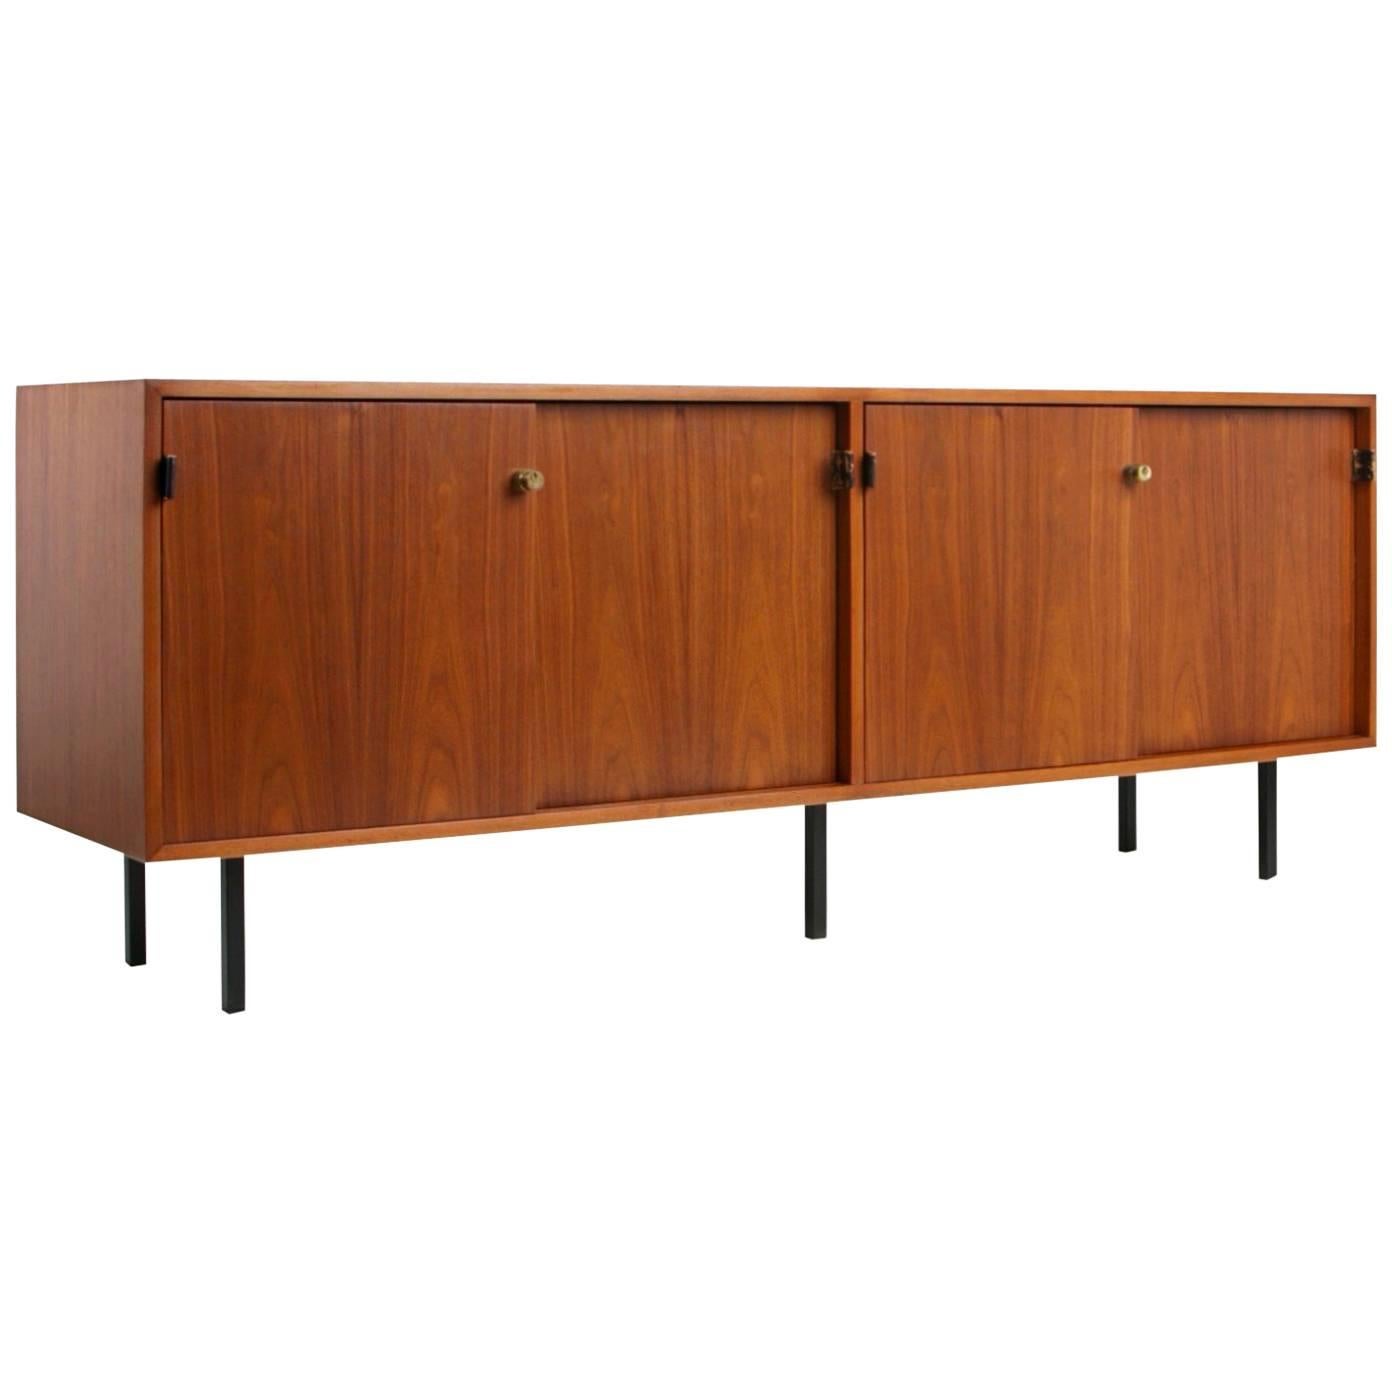 Restored Early Production Signed Credenza by Florence Knoll for Knoll Associates